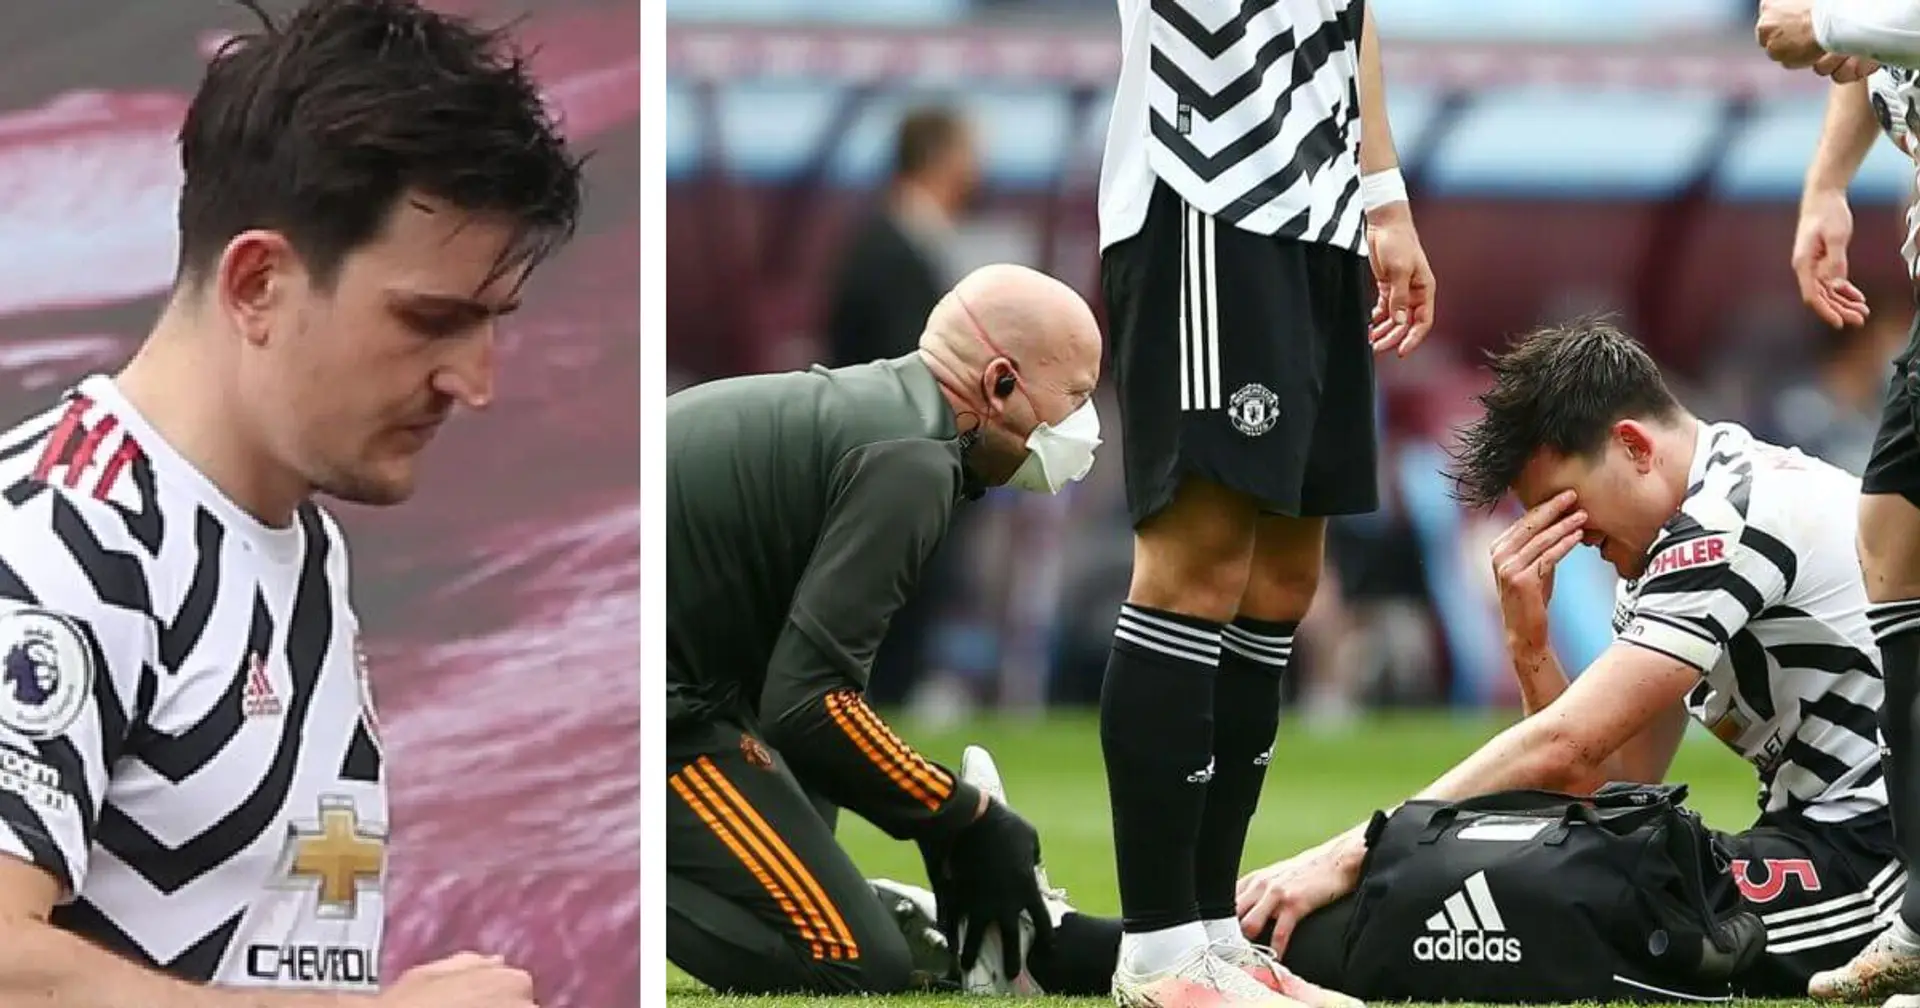 Harry Maguire's left foot in 'support boot' amid serious concerns over injury